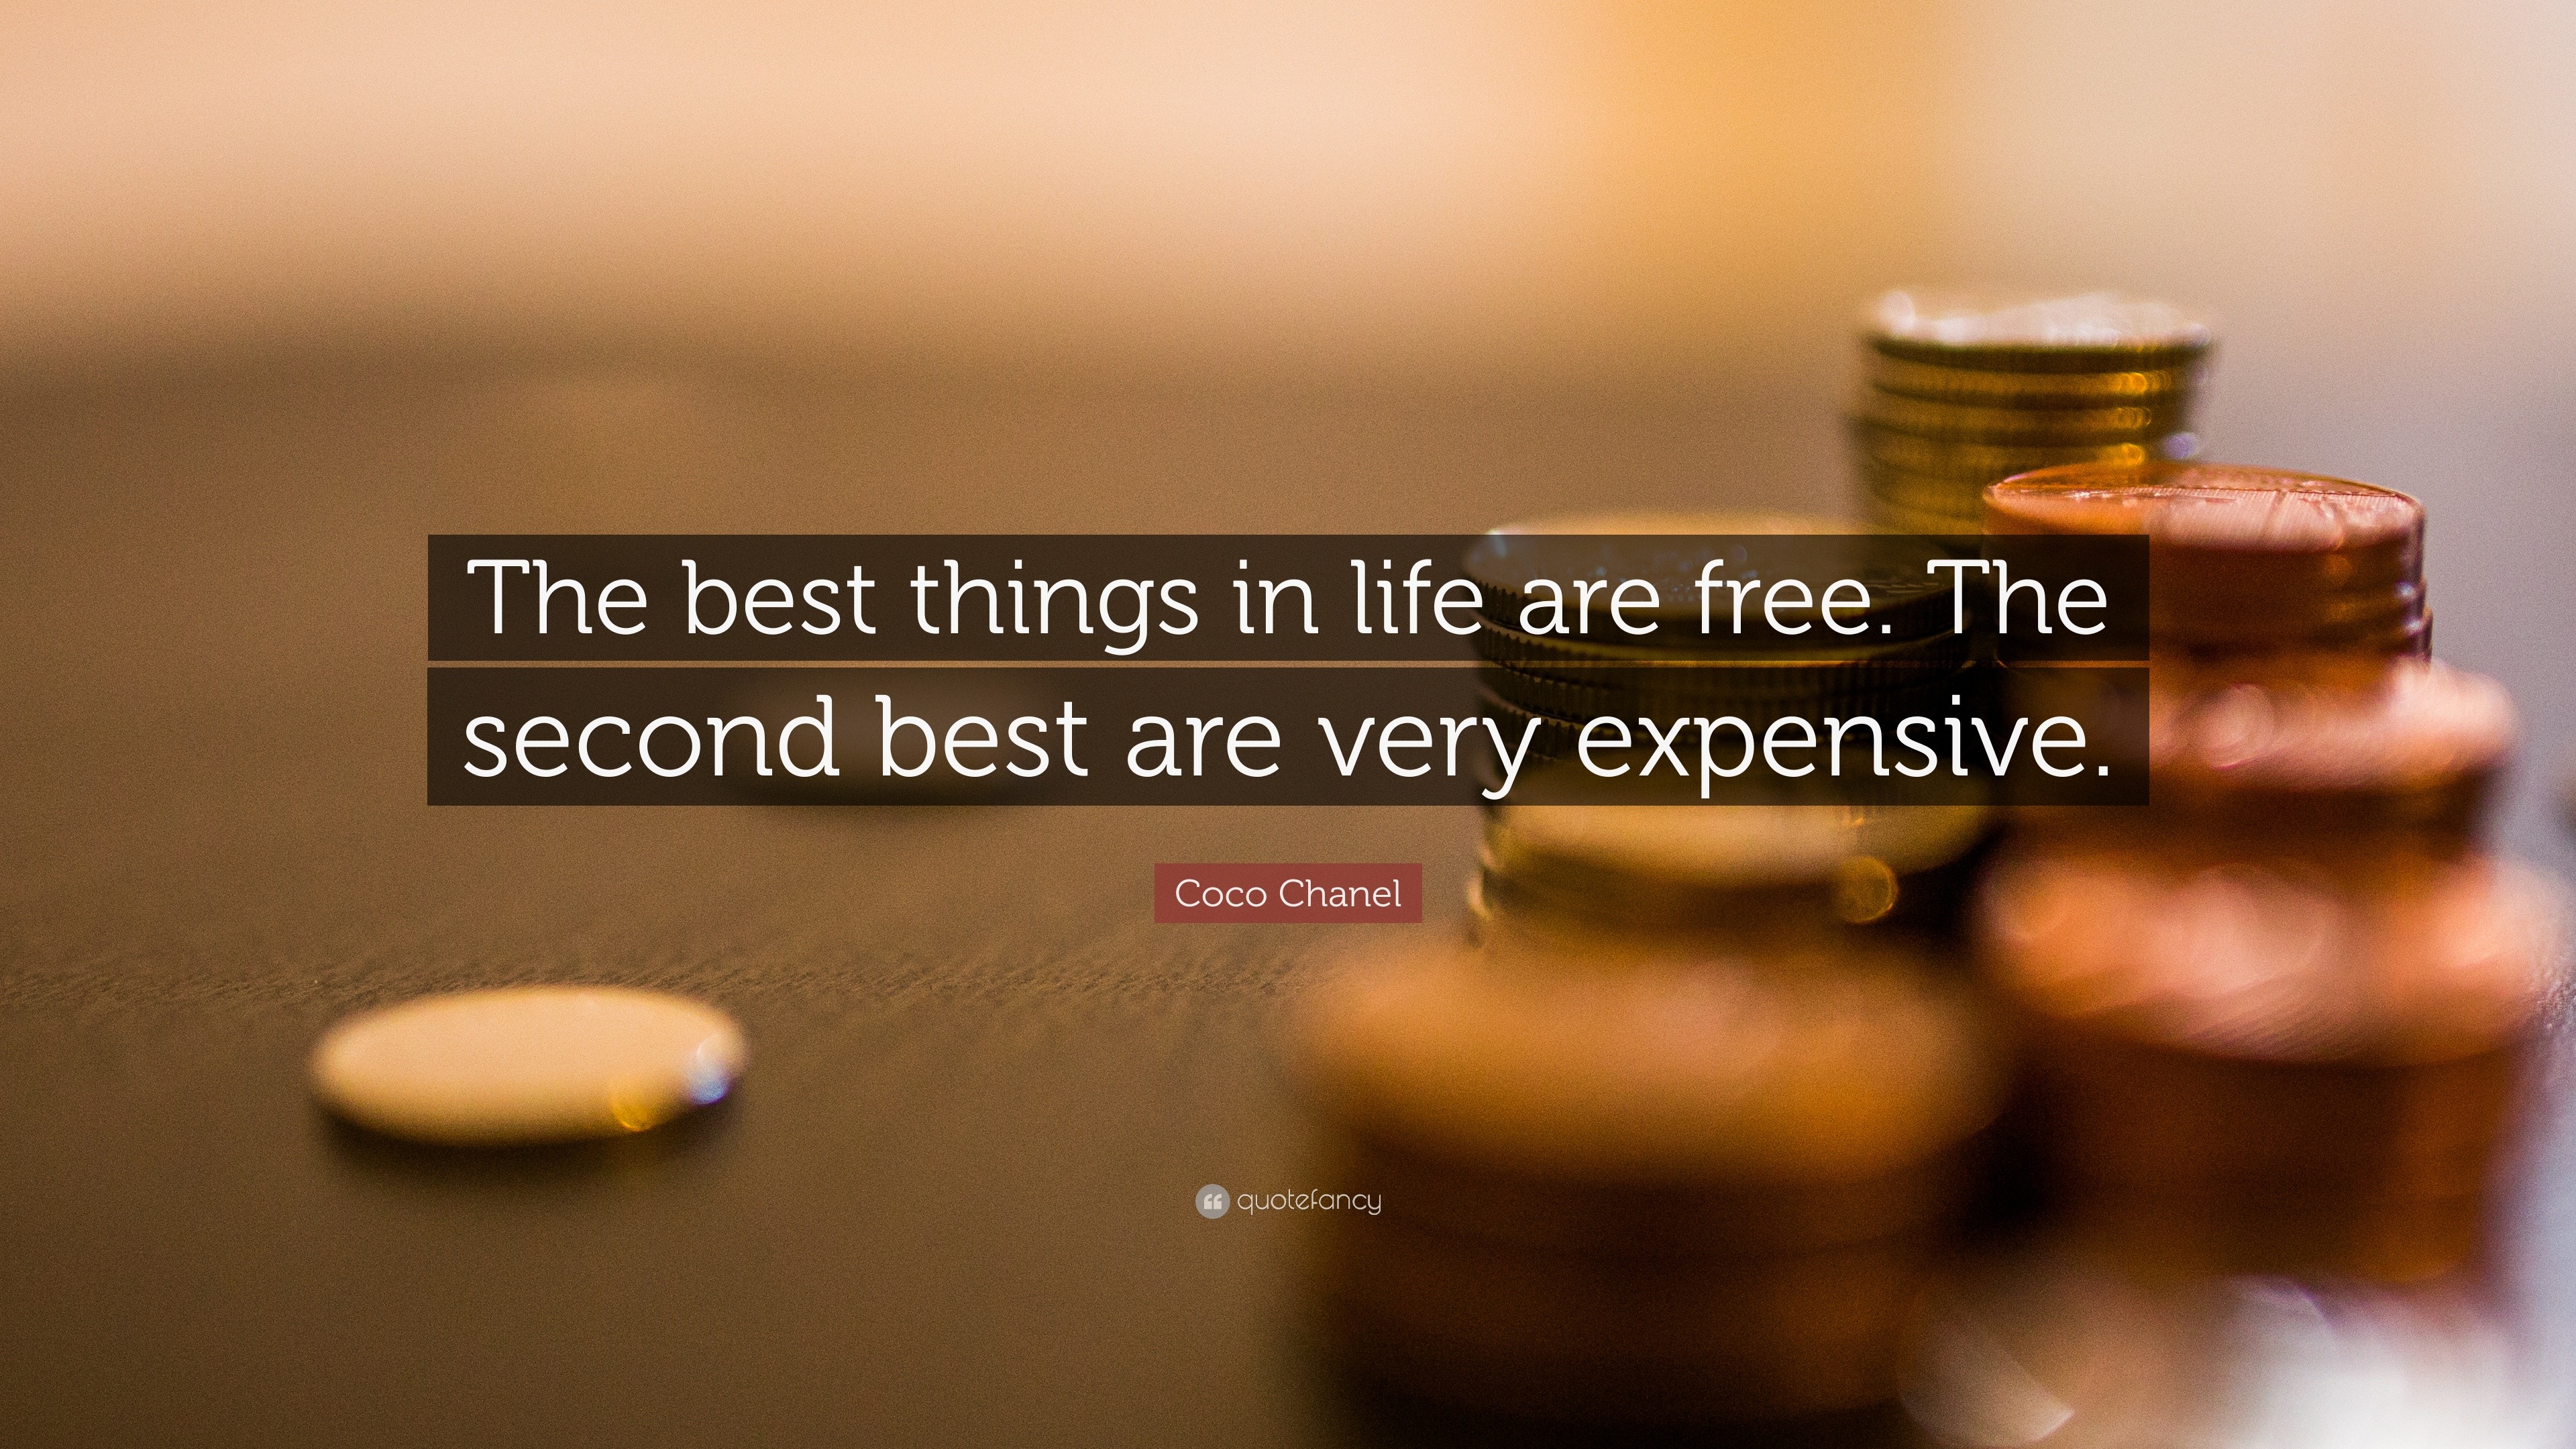 Coco Chanel Quote: “The best things in life are free. The second best are  very expensive.”